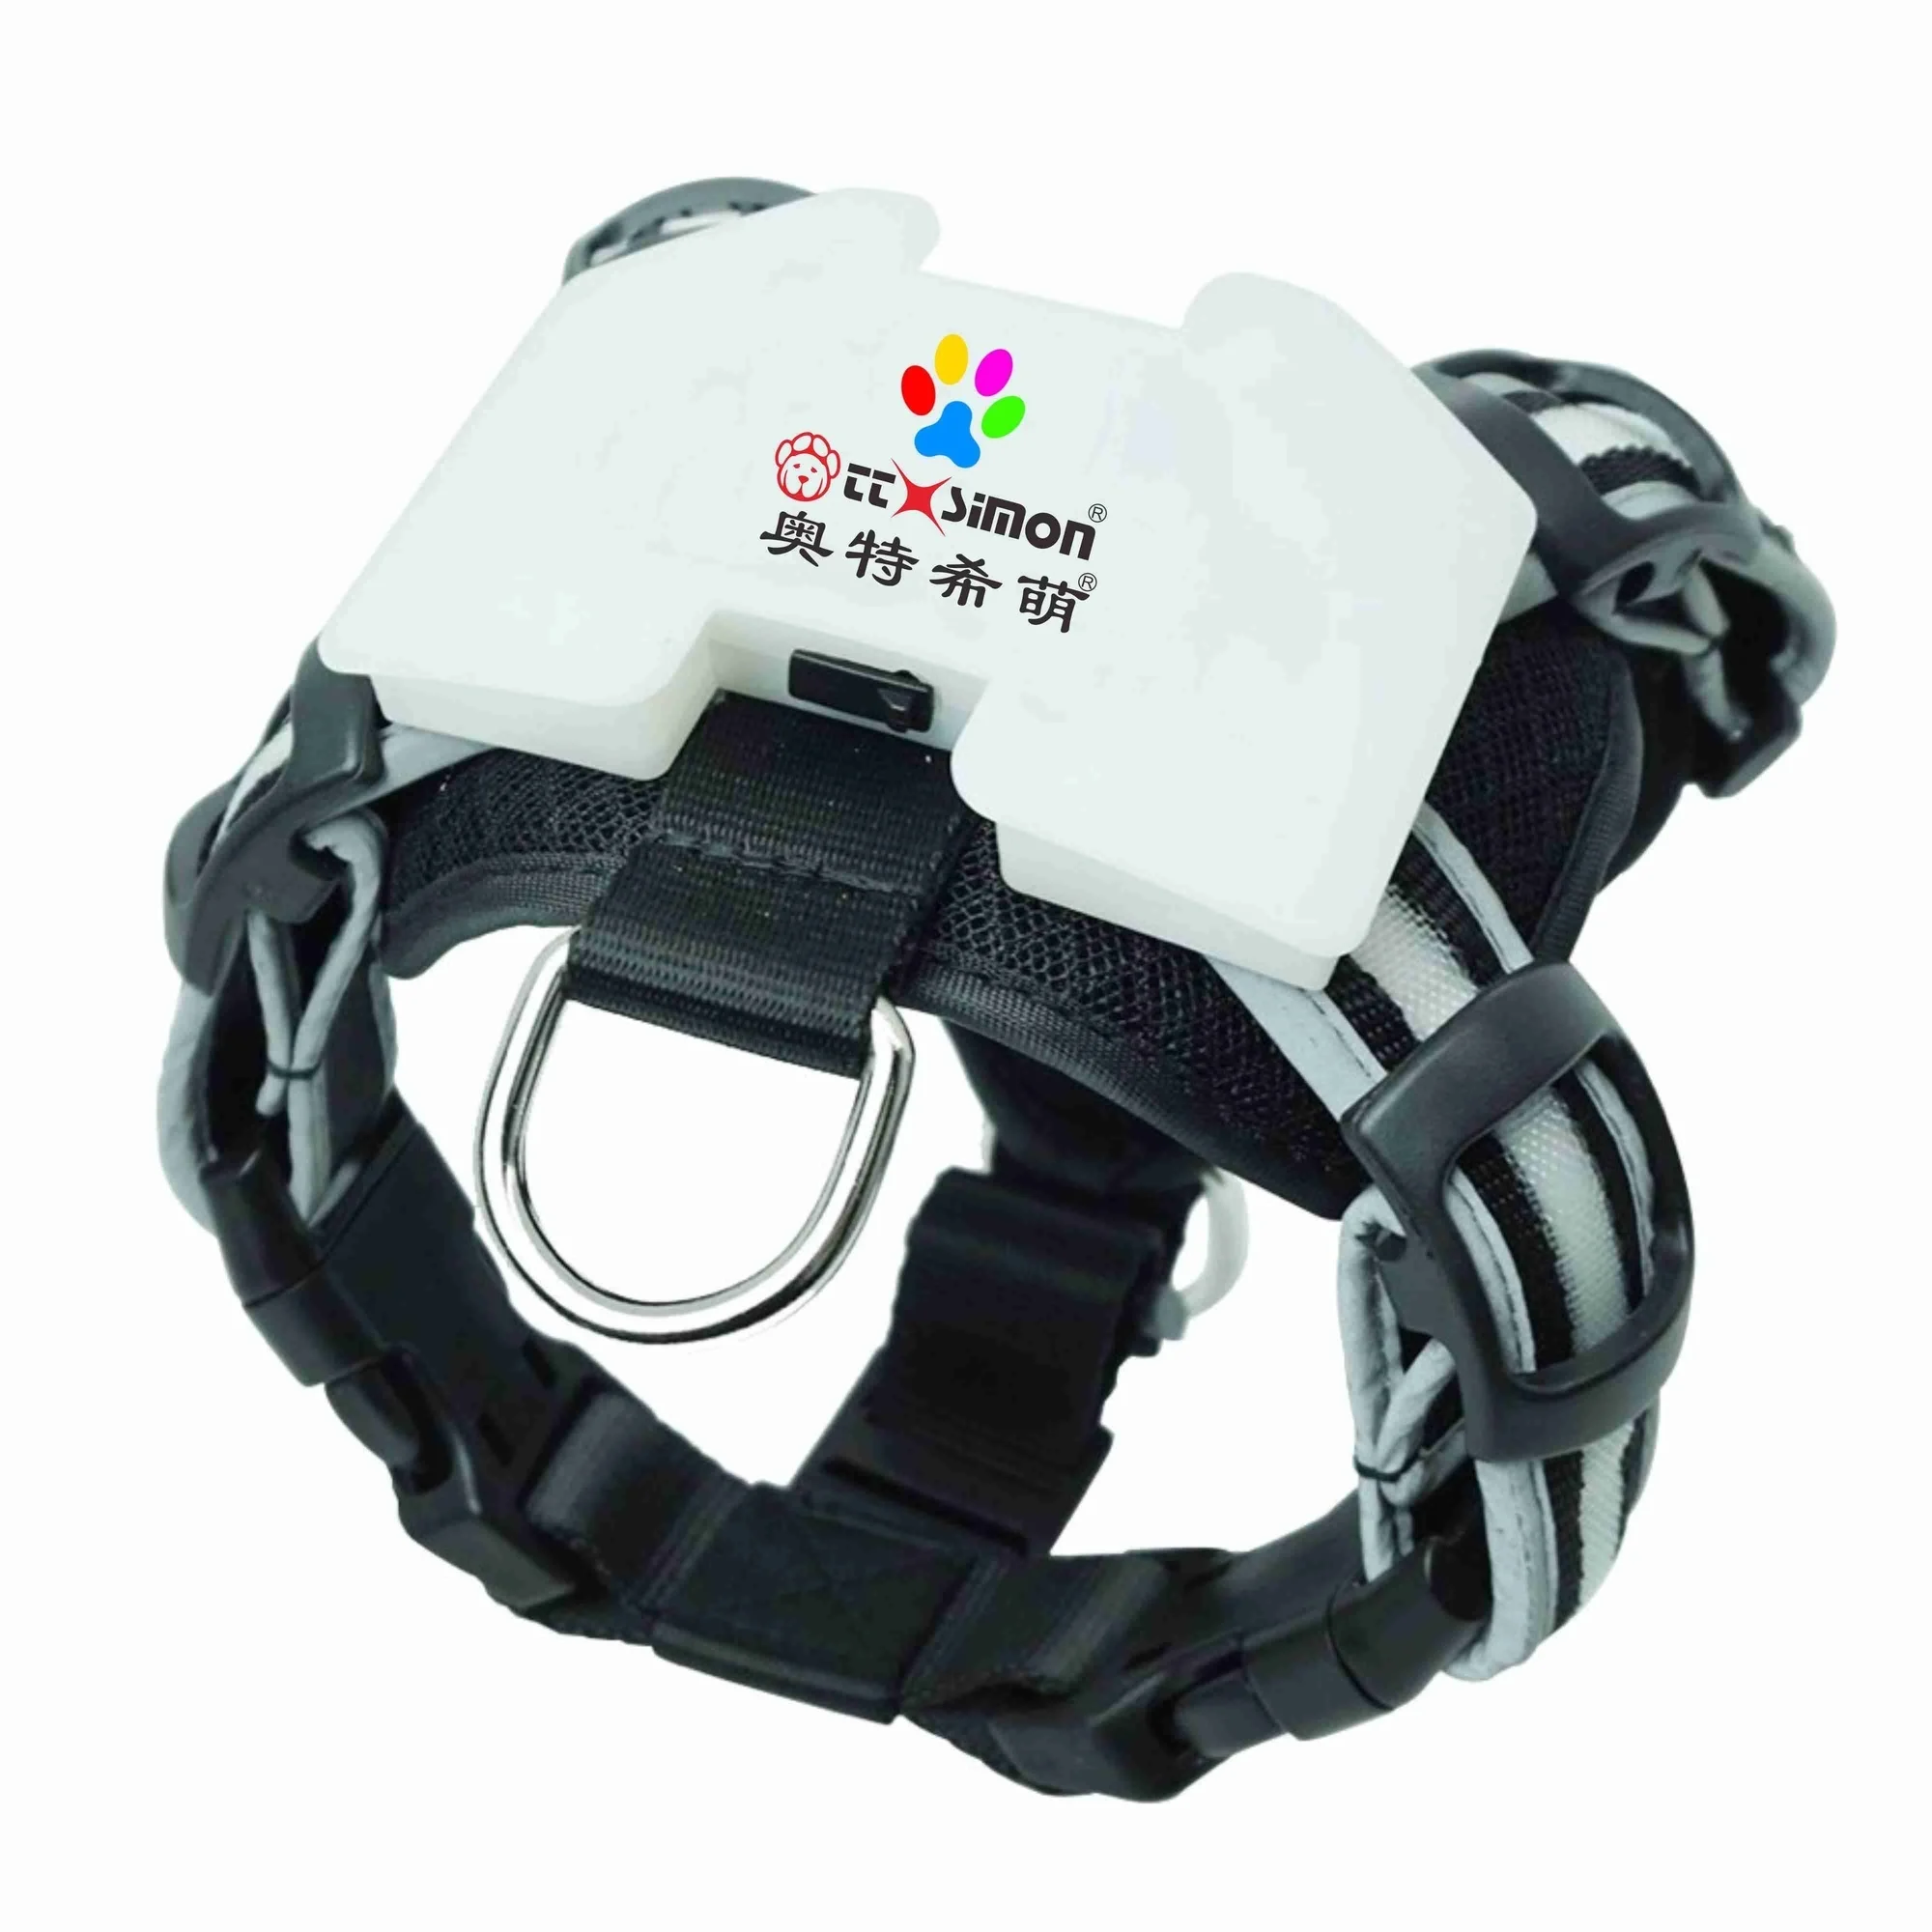 

rechargeable cc led simon dog harness for Large Dog dog collars and leashes custom